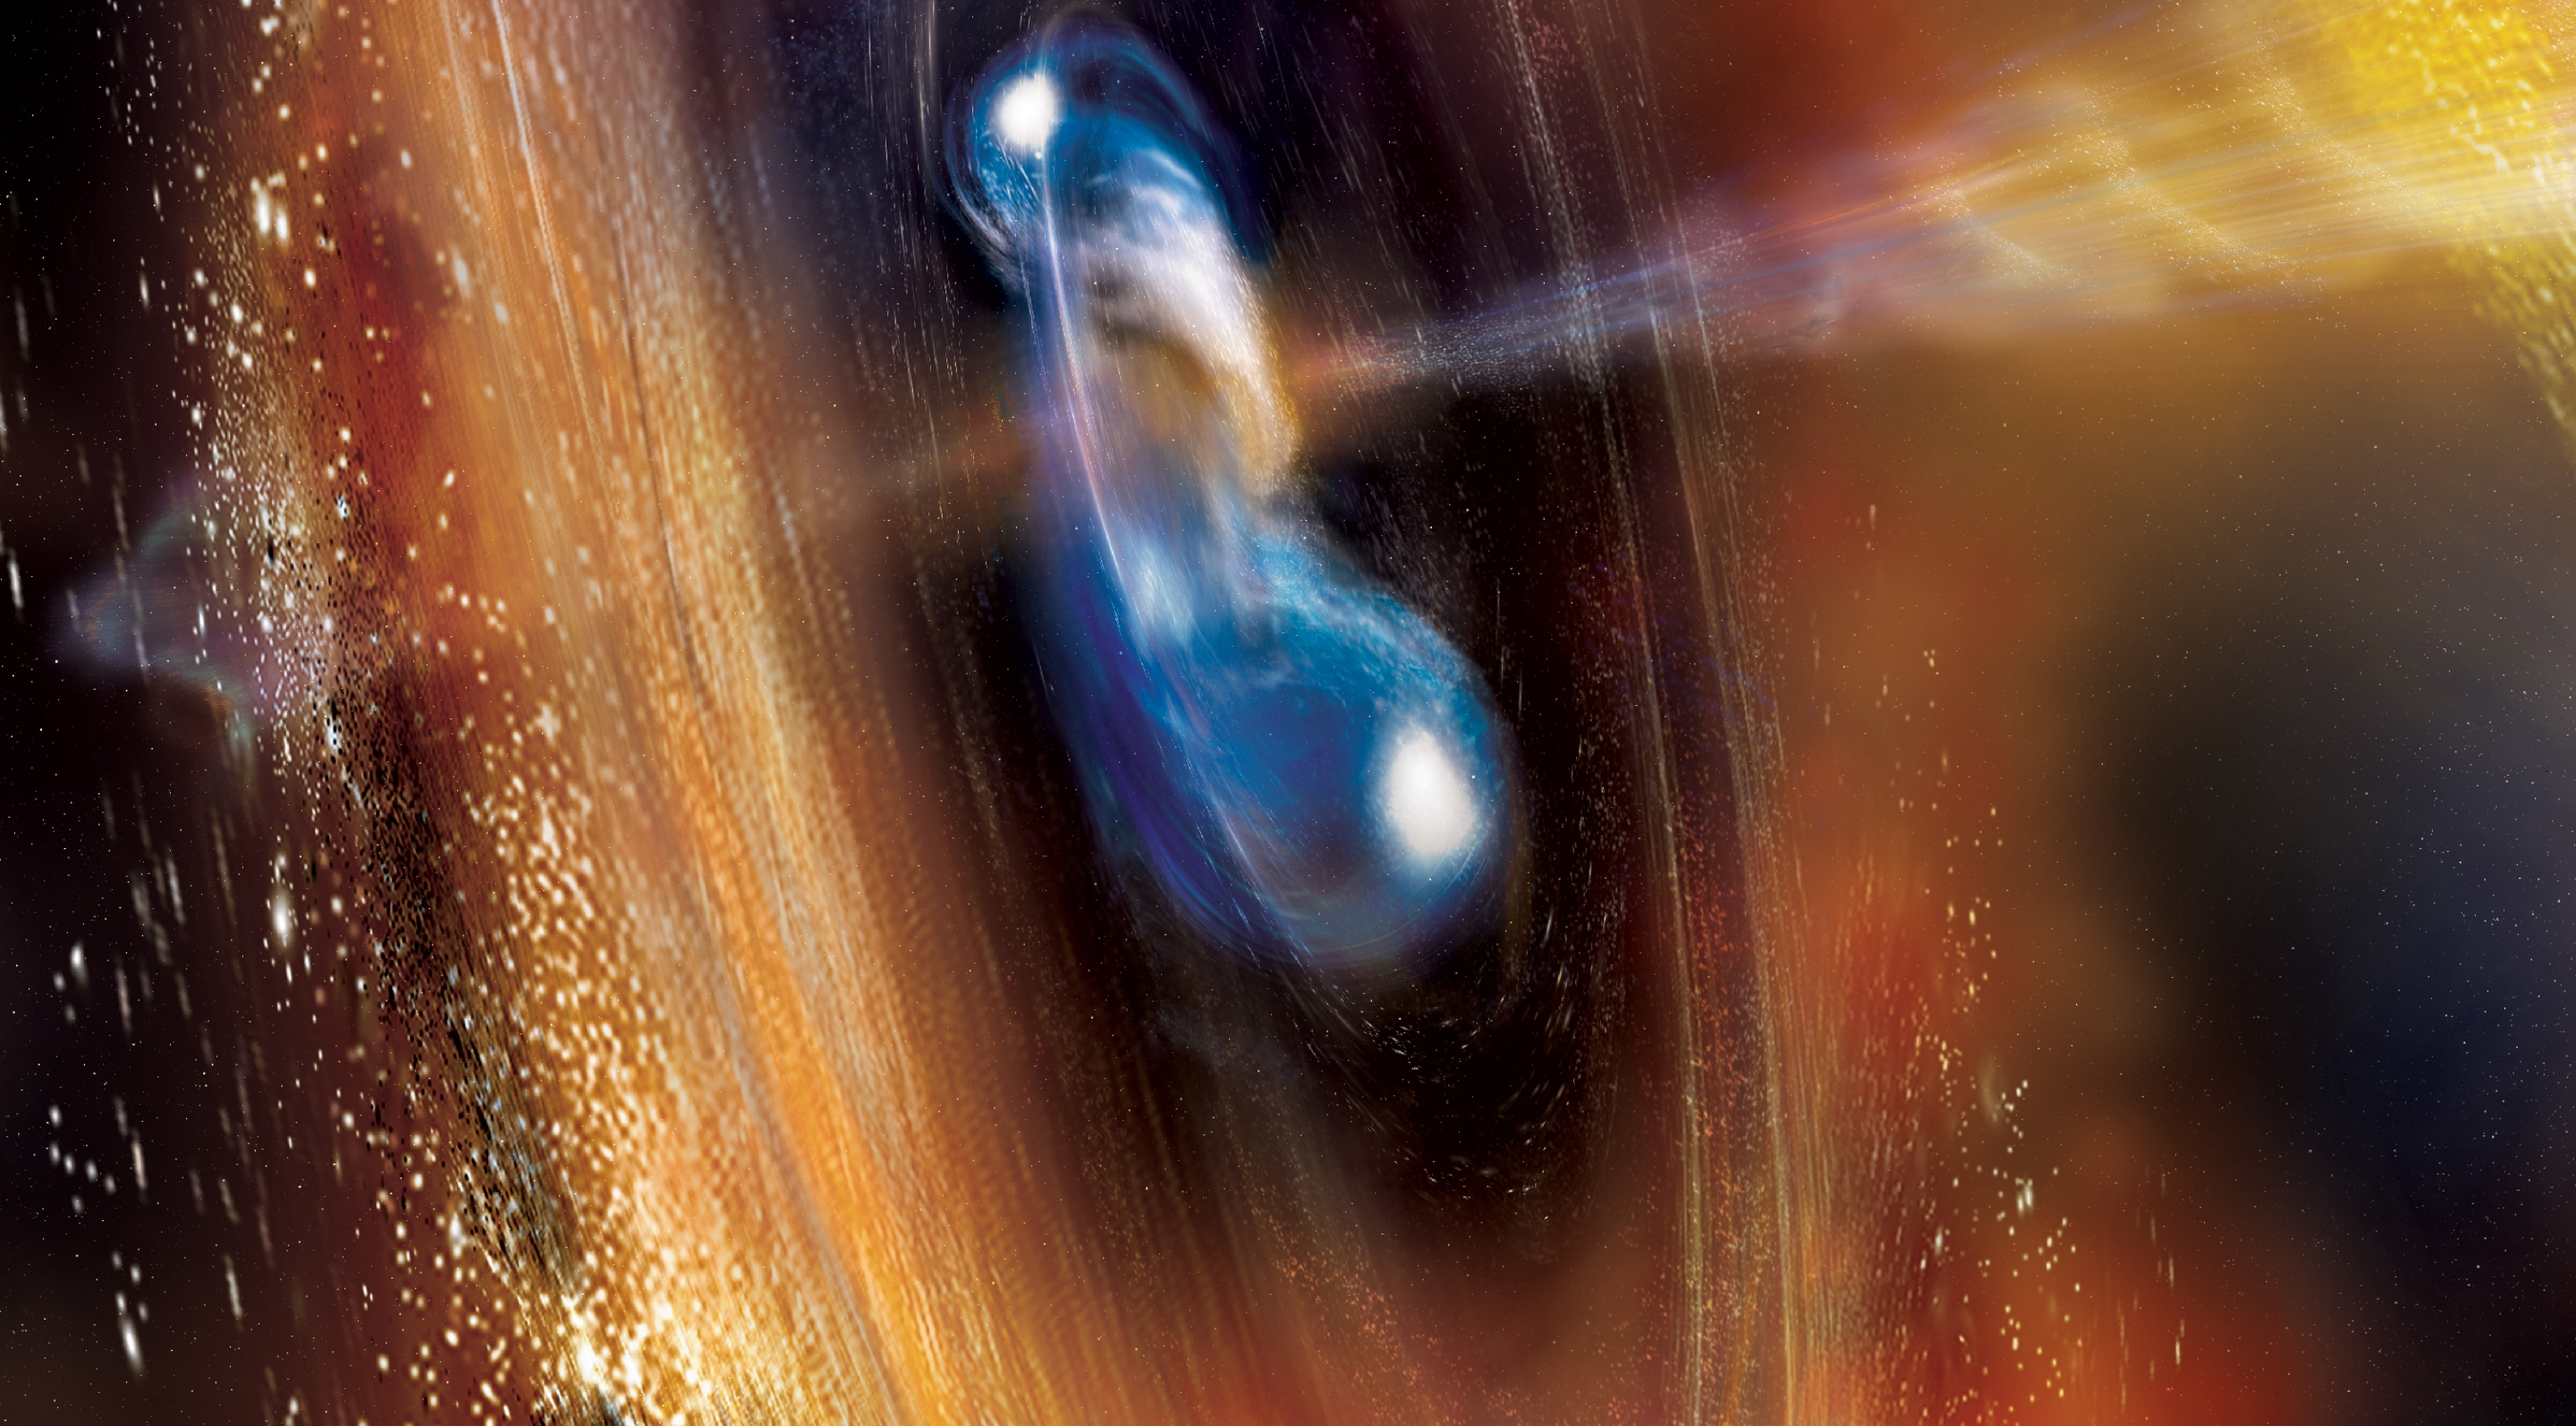 Two neutron stars begin to merge in this illustration, blasting a jet of high-speed particles and producing a cloud of debris. Scientists think these kinds of events are factories for a significant portion of the universe’s heavy elements, including gold. Credit: A. Simonnet (Sonoma State University) and NASA’s Goddard Space Flight Center